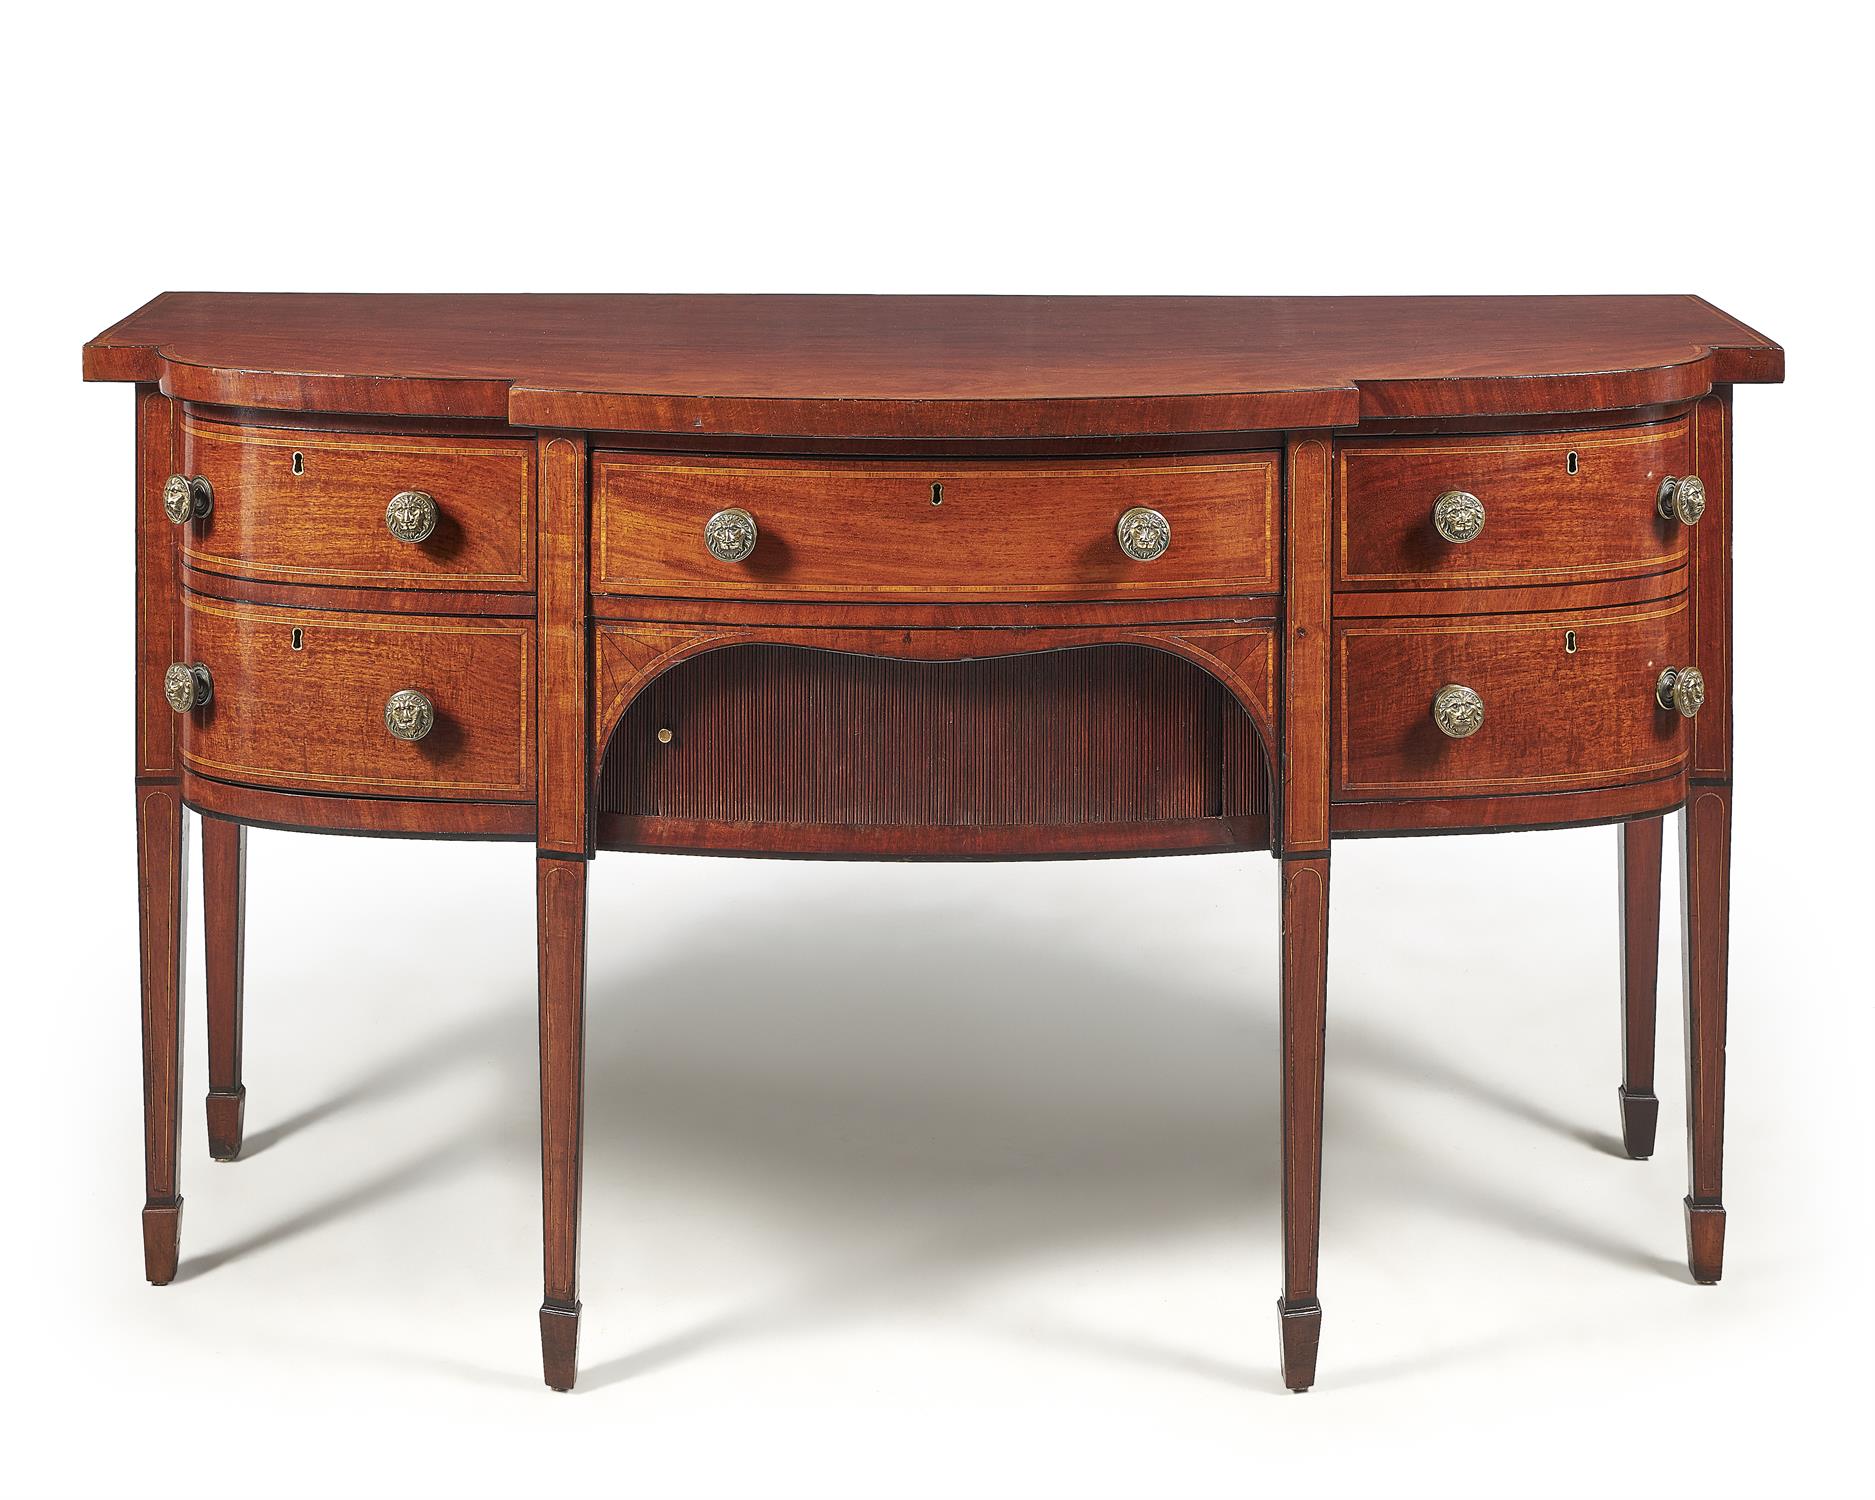 A George III mahogany and satinwood banded breakfront sideboard